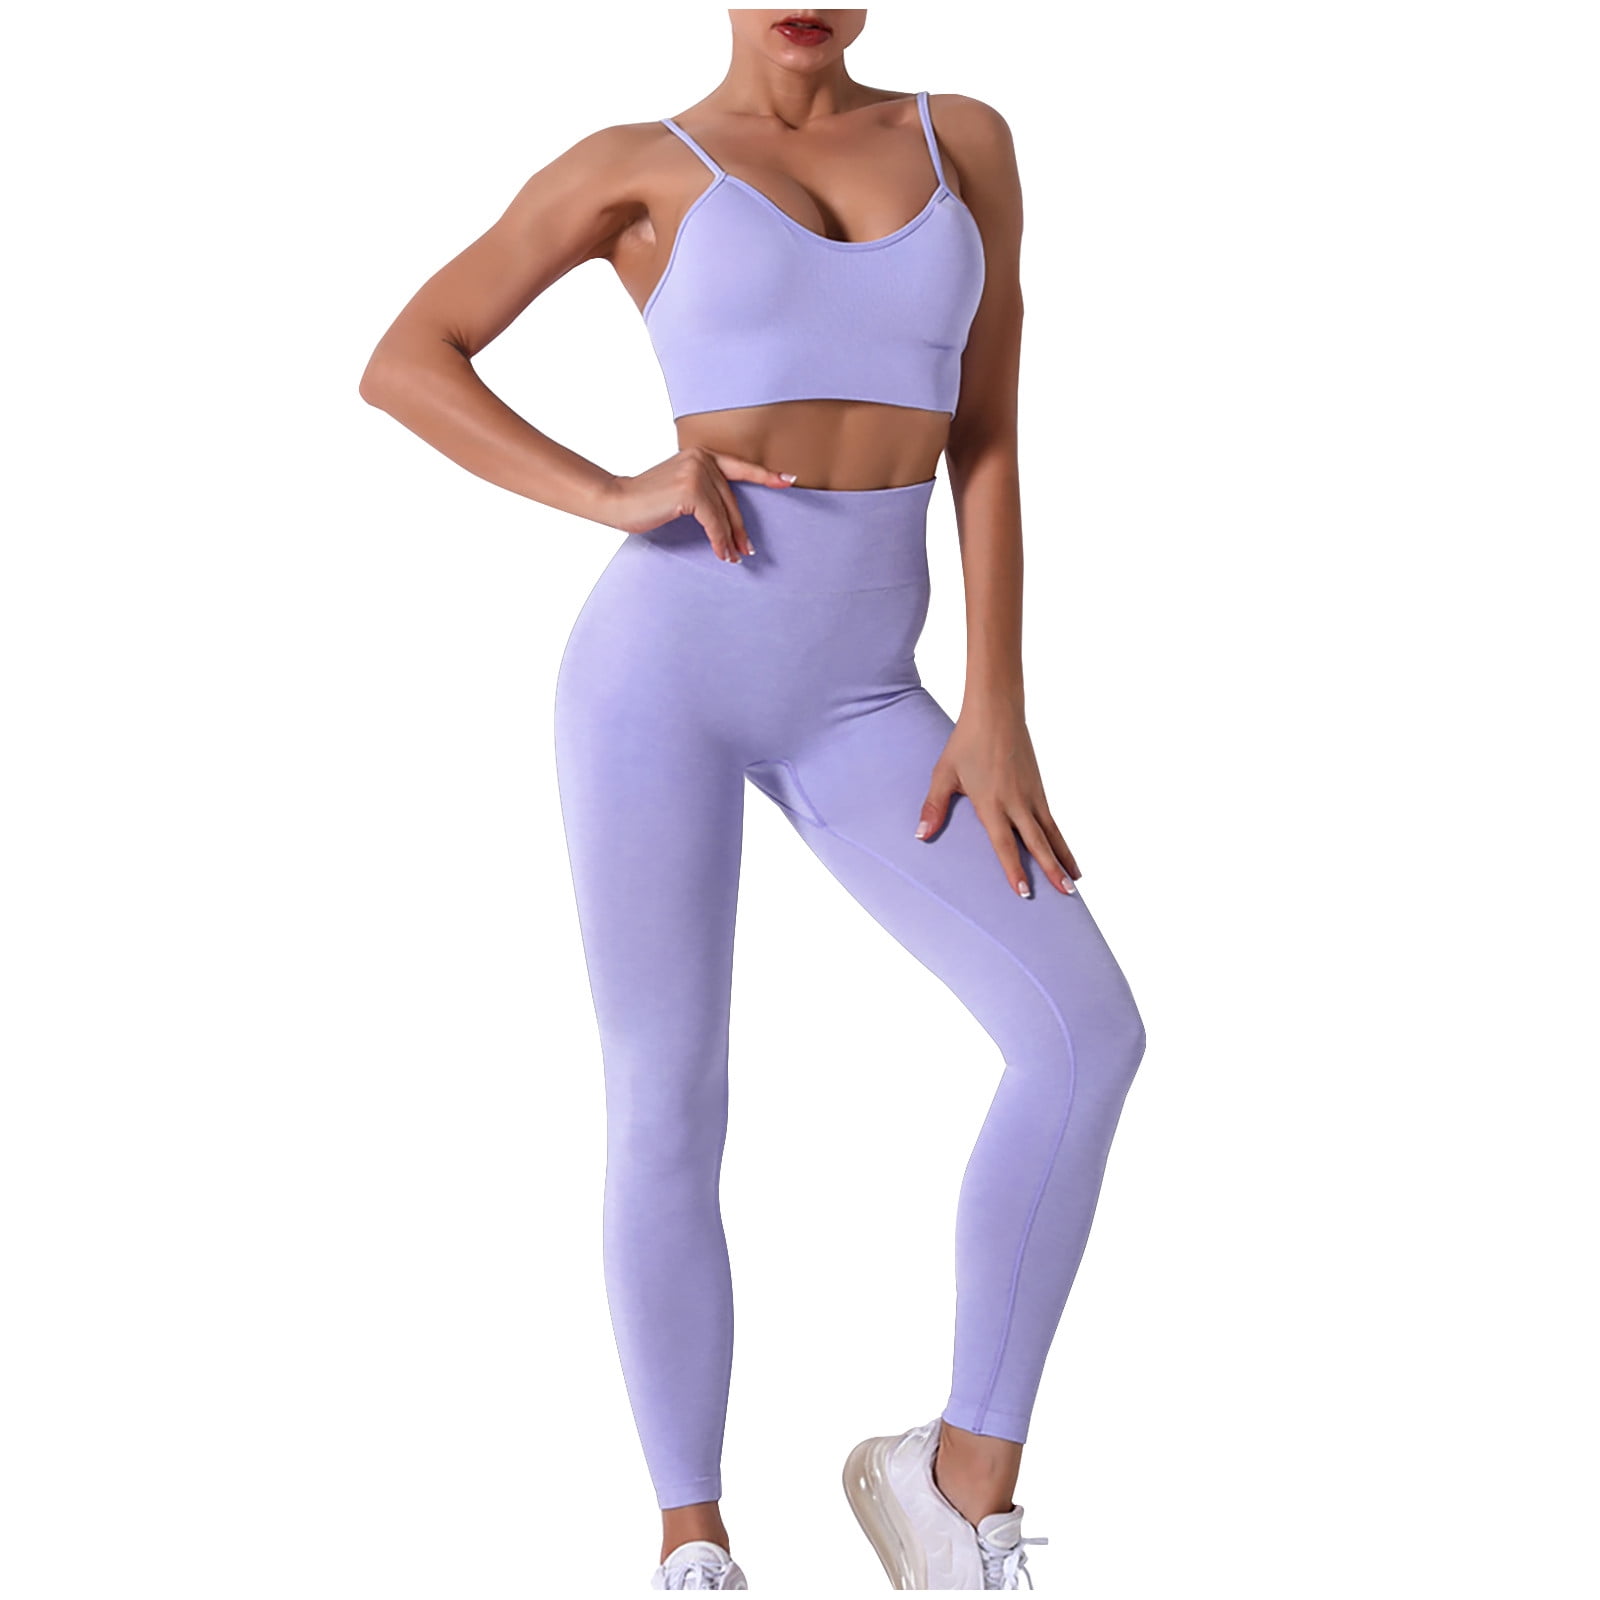 Yoga Outfits For Women 2 Piece Leggings Workout Sets, Short Sleeve